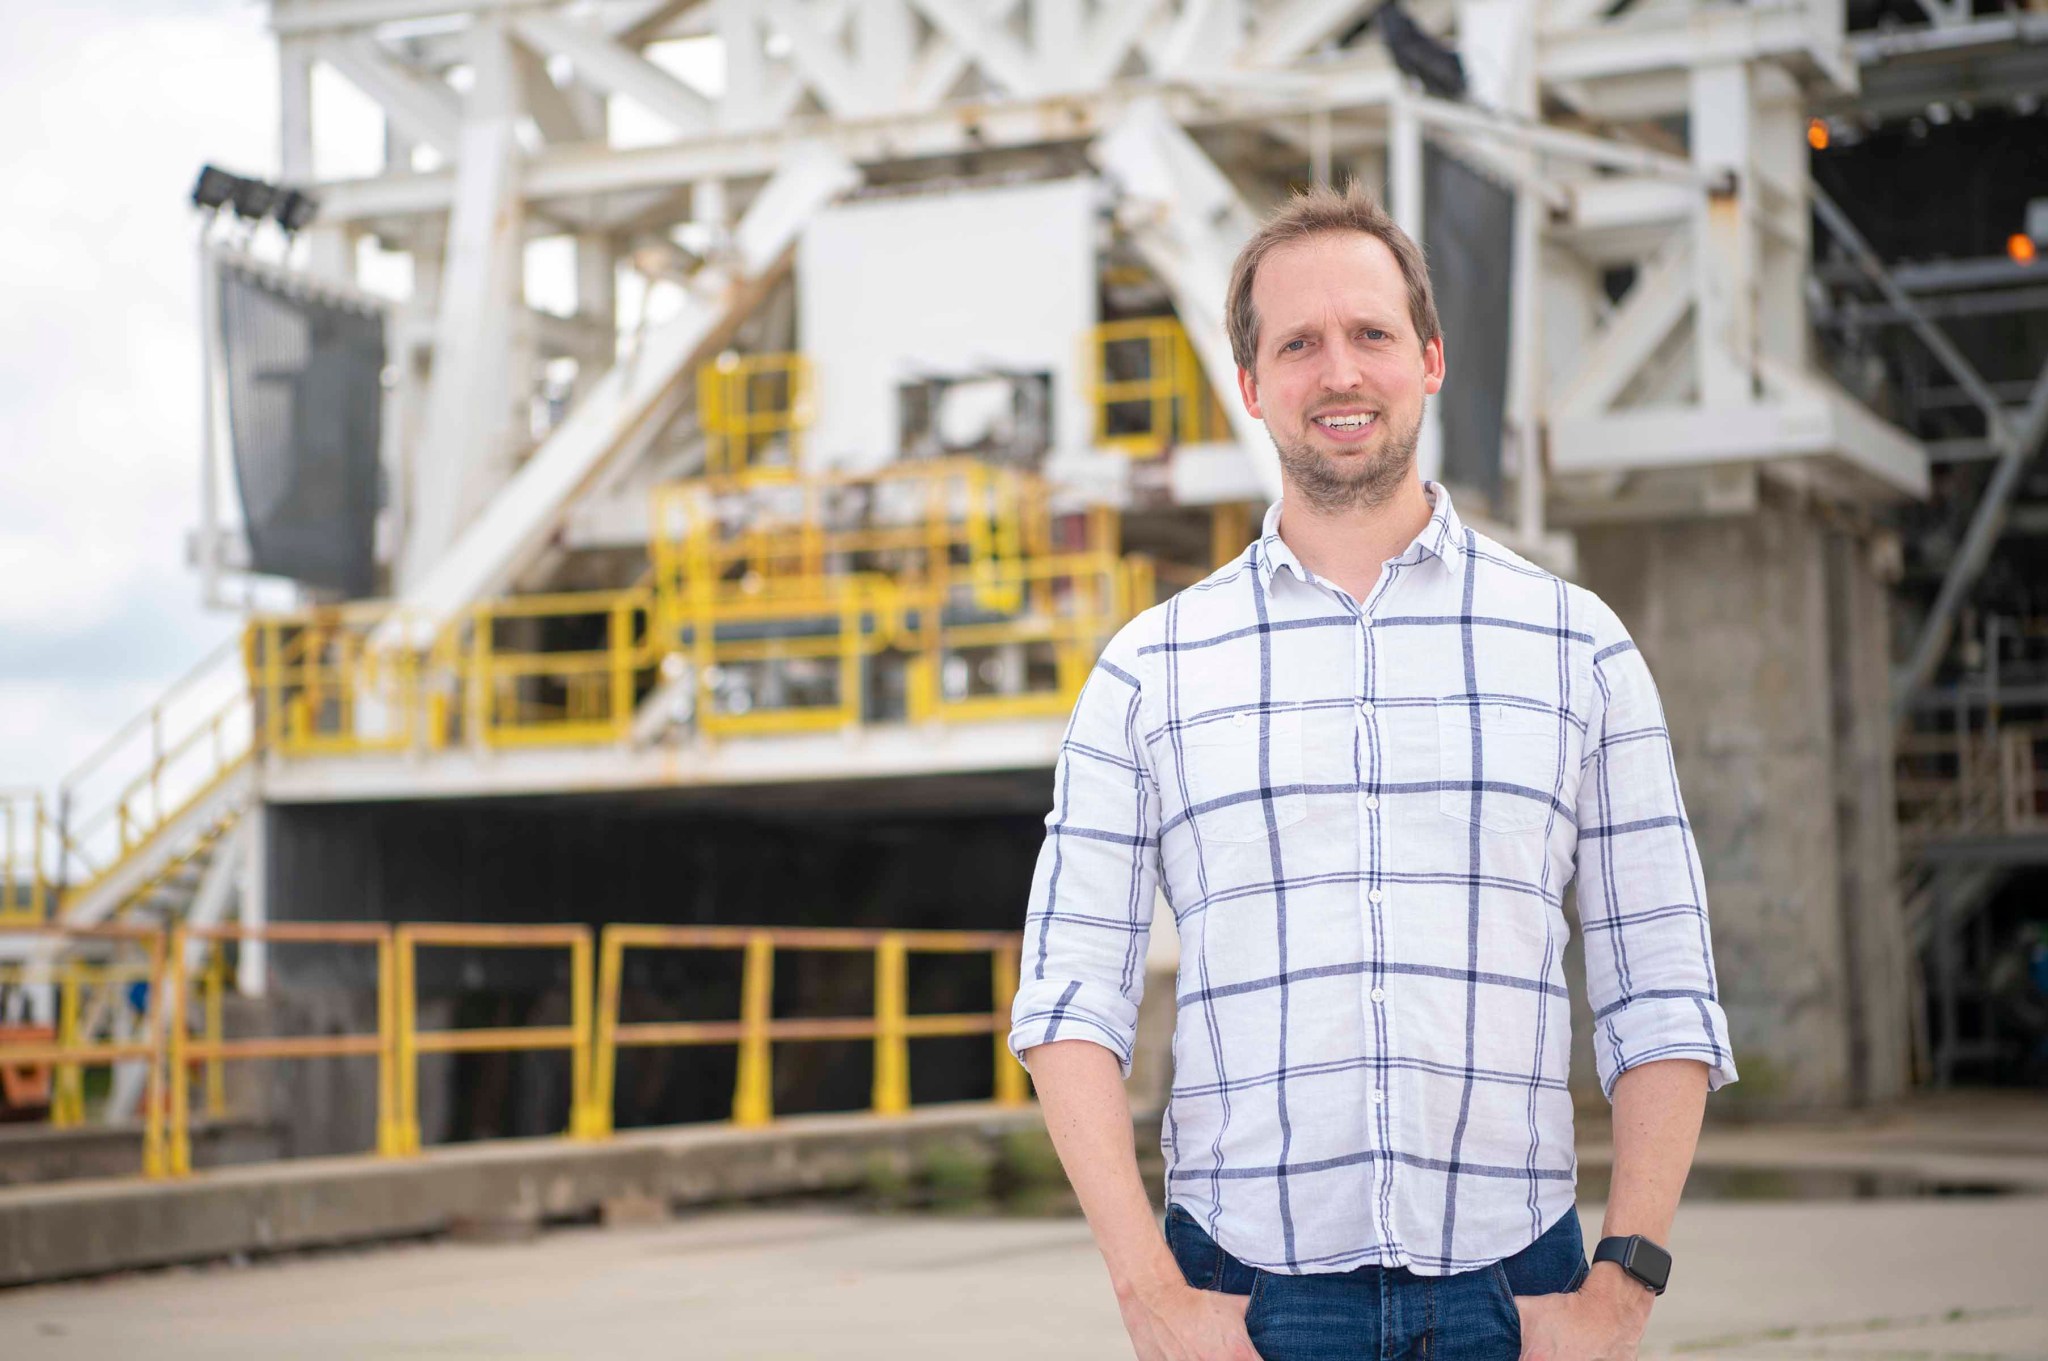 Chris Barnett-Woods, wearing a white dress shirt with black stripes, is shown standing in front of the E-1 Test Stand at NASA’s Stennis Space Center